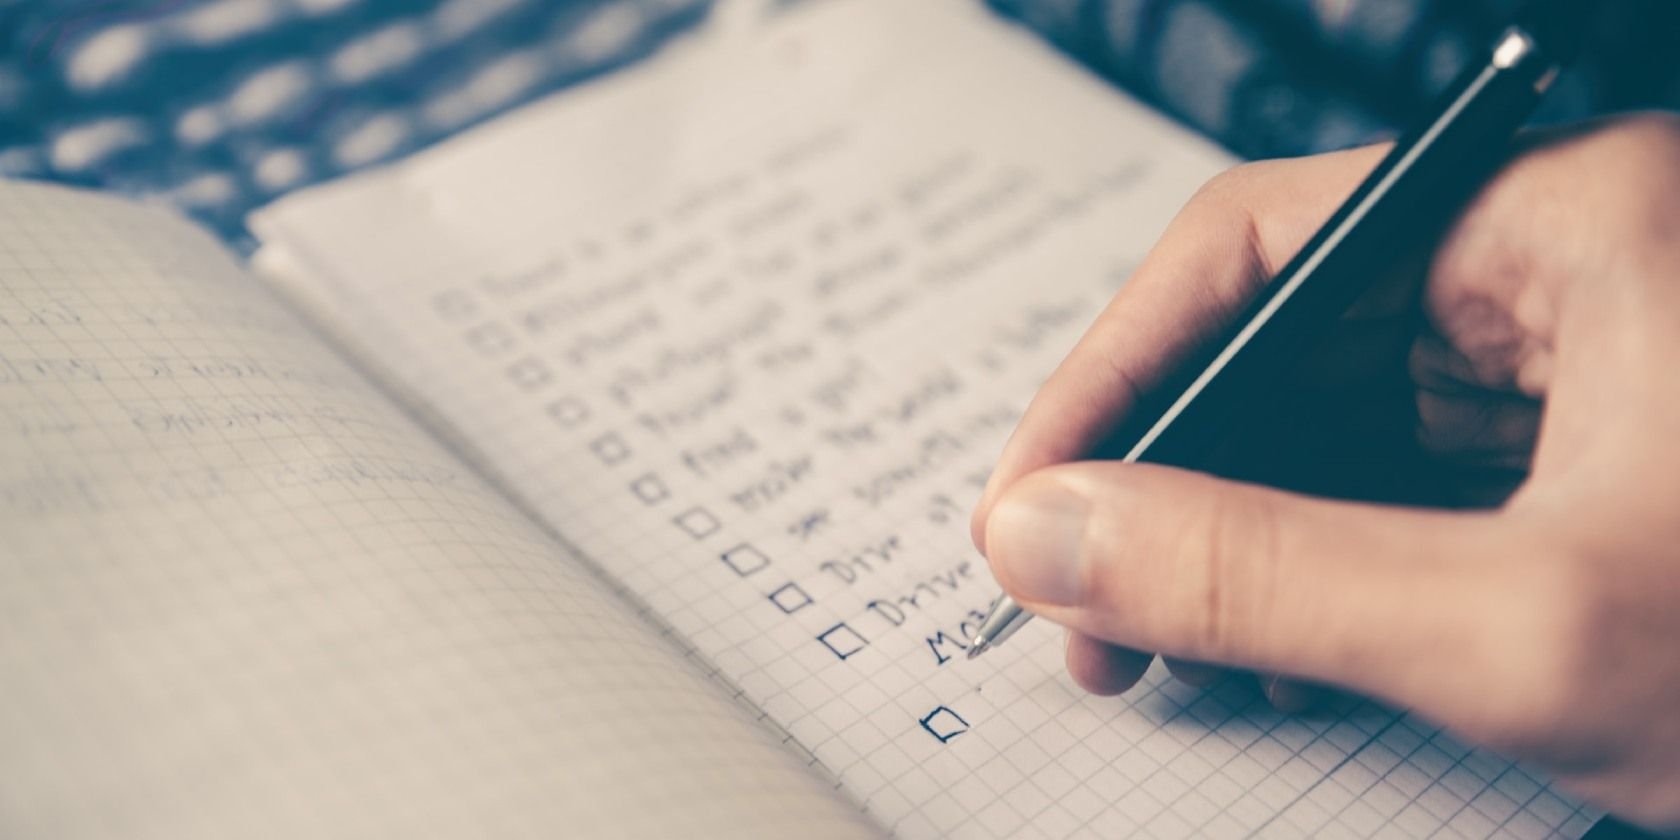 6 Uncomplicated To-Do Apps to Focus on Tasks and Get Things Done